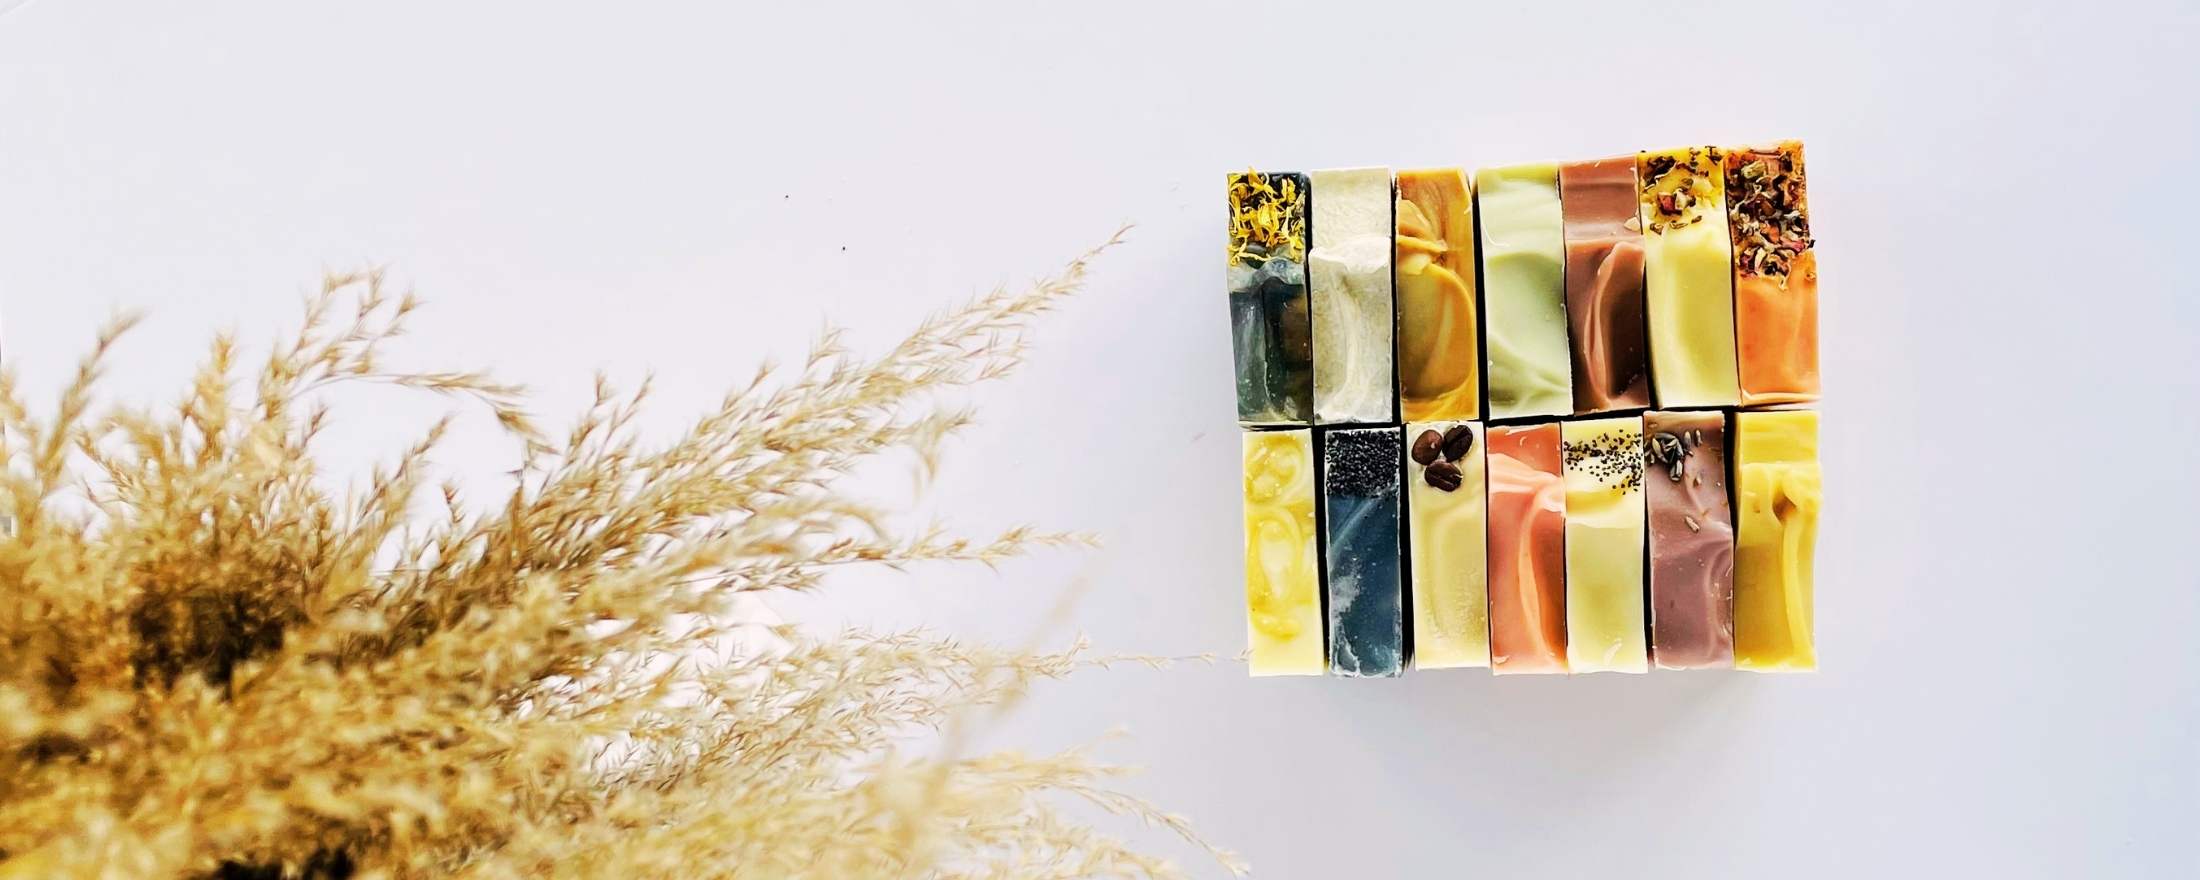 A top view of different bars of soap, each with unique colors and textures, arranged neatly in a grid pattern. The soaps are shown on a white surface with a text overlay that reads, "Healthy skin starts from within - prioritize nourishing your skin with high-quality natural skincare products, just as you prioritize your body with a balanced diet." There is also a button displayed that leads to a page where all products are available for shopping.